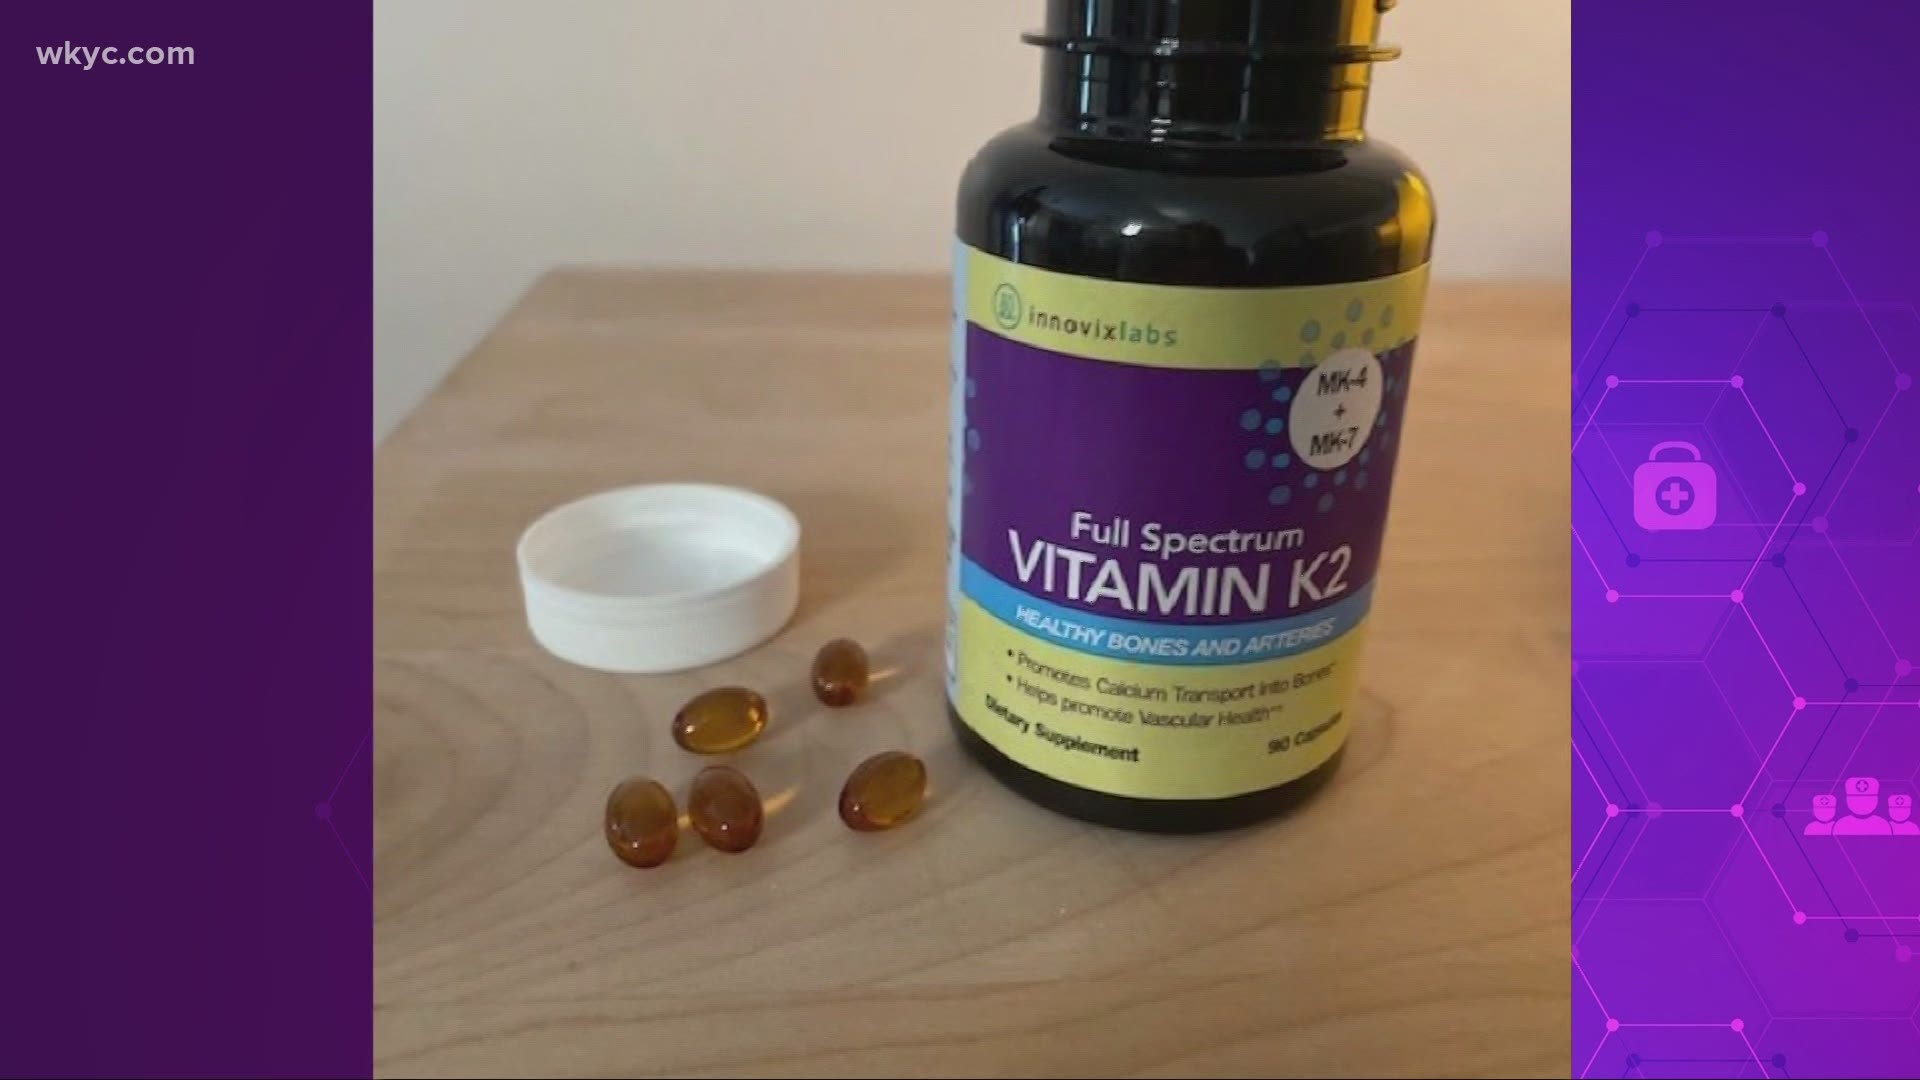 A study on vitamin D and K2 that had some significant findings when it comes to protecting people who catch COVID-19. Monica Robins reports.